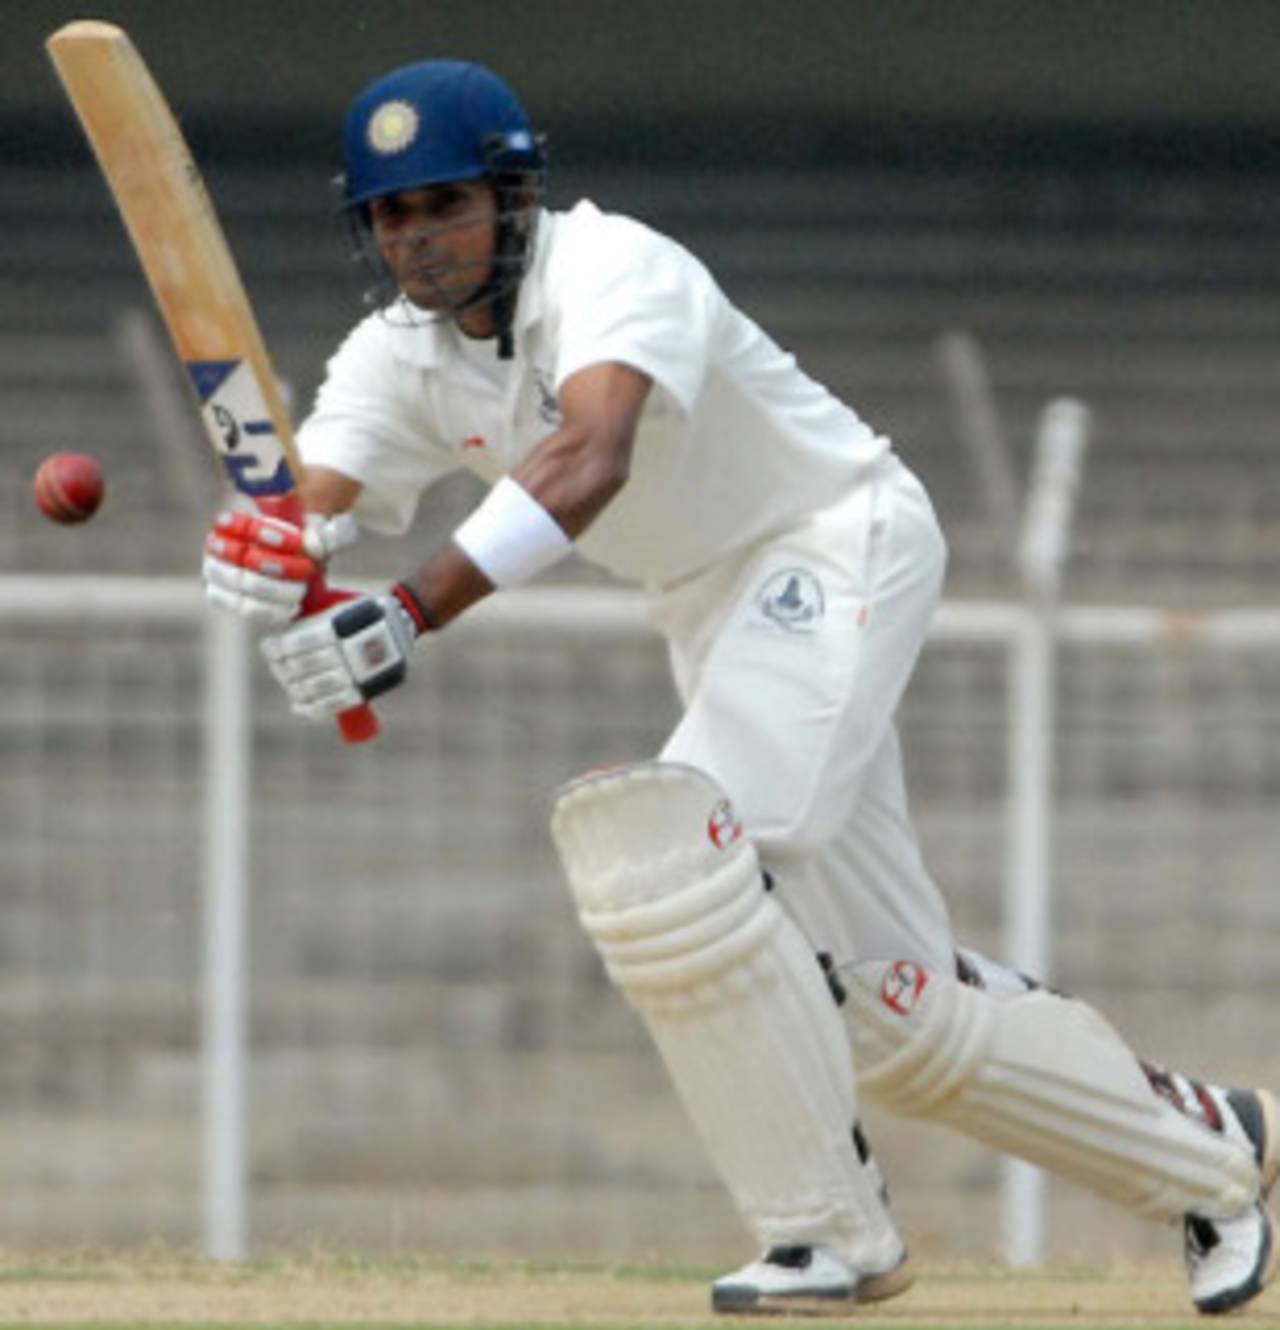 S Badrinath remained unbeaten on 93 at the end of the first day, Tamil Nadu v Karnataka, Ranji Trophy Super League, Group A, 3rd round, Chennai, 1st day, November 23, 2007 